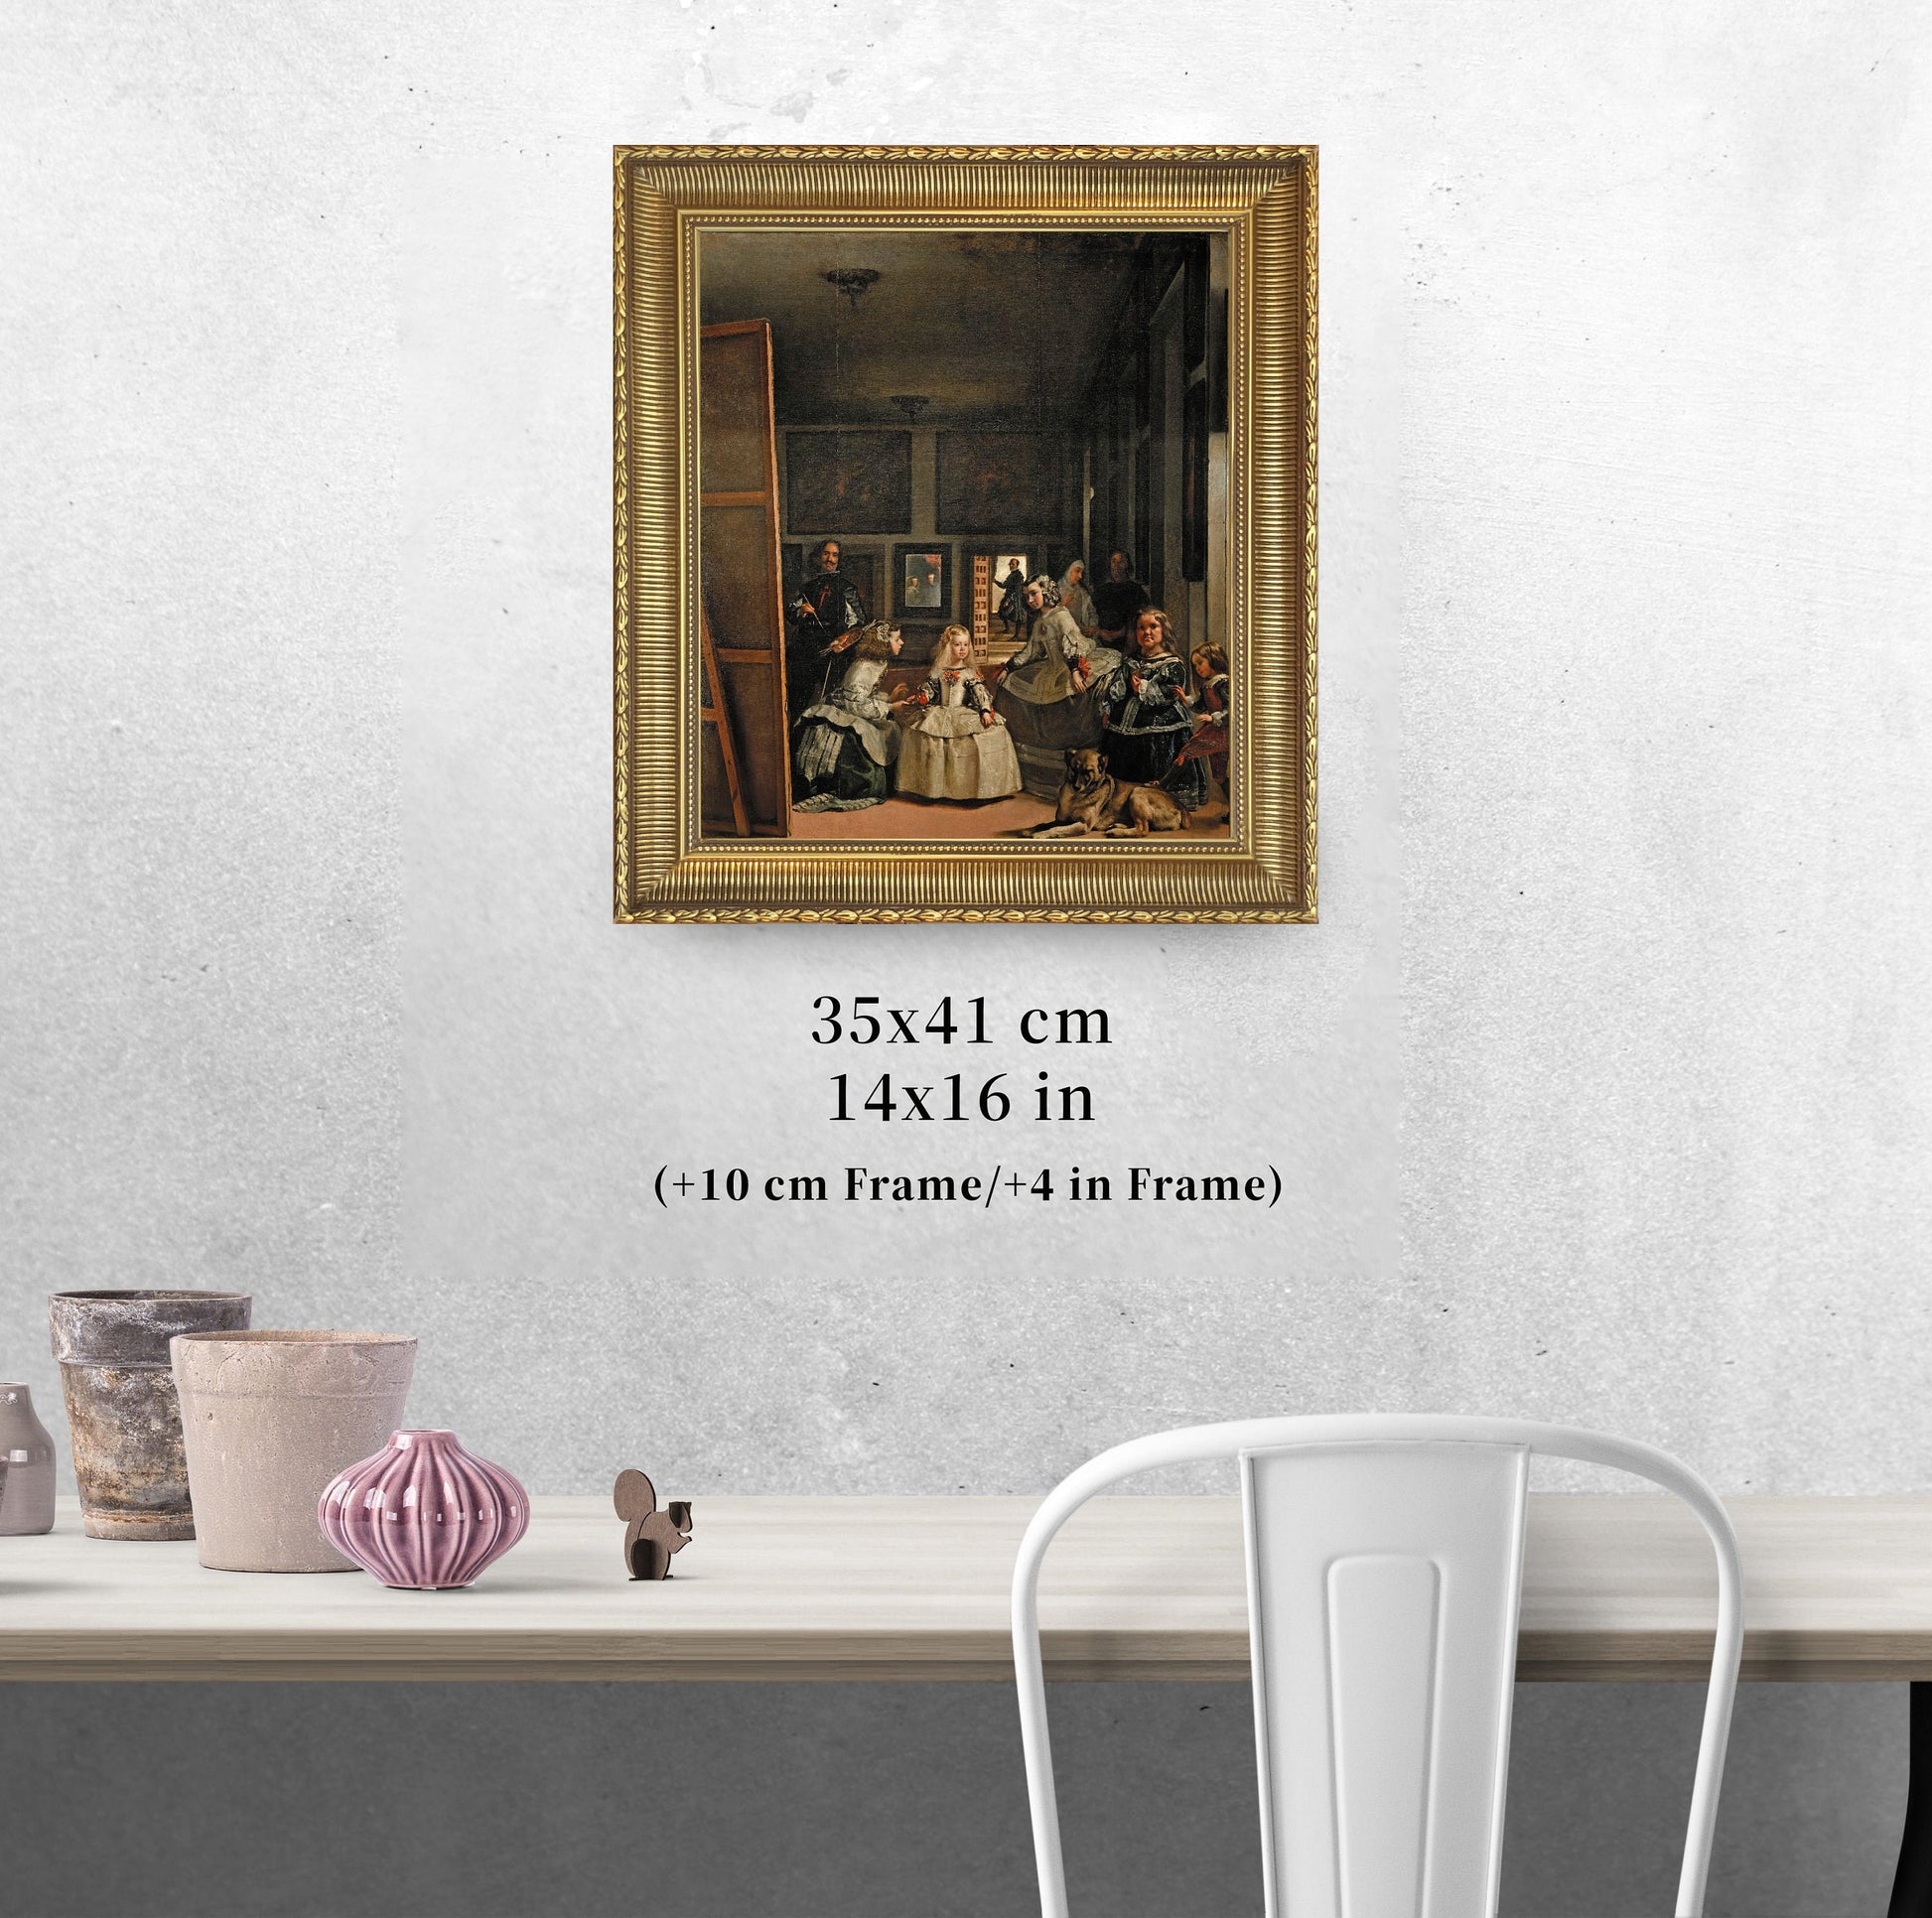 Las Meninas by Diego Velázquez, 3d Printed with texture and brush strokes looks like original oil-painting, code:026